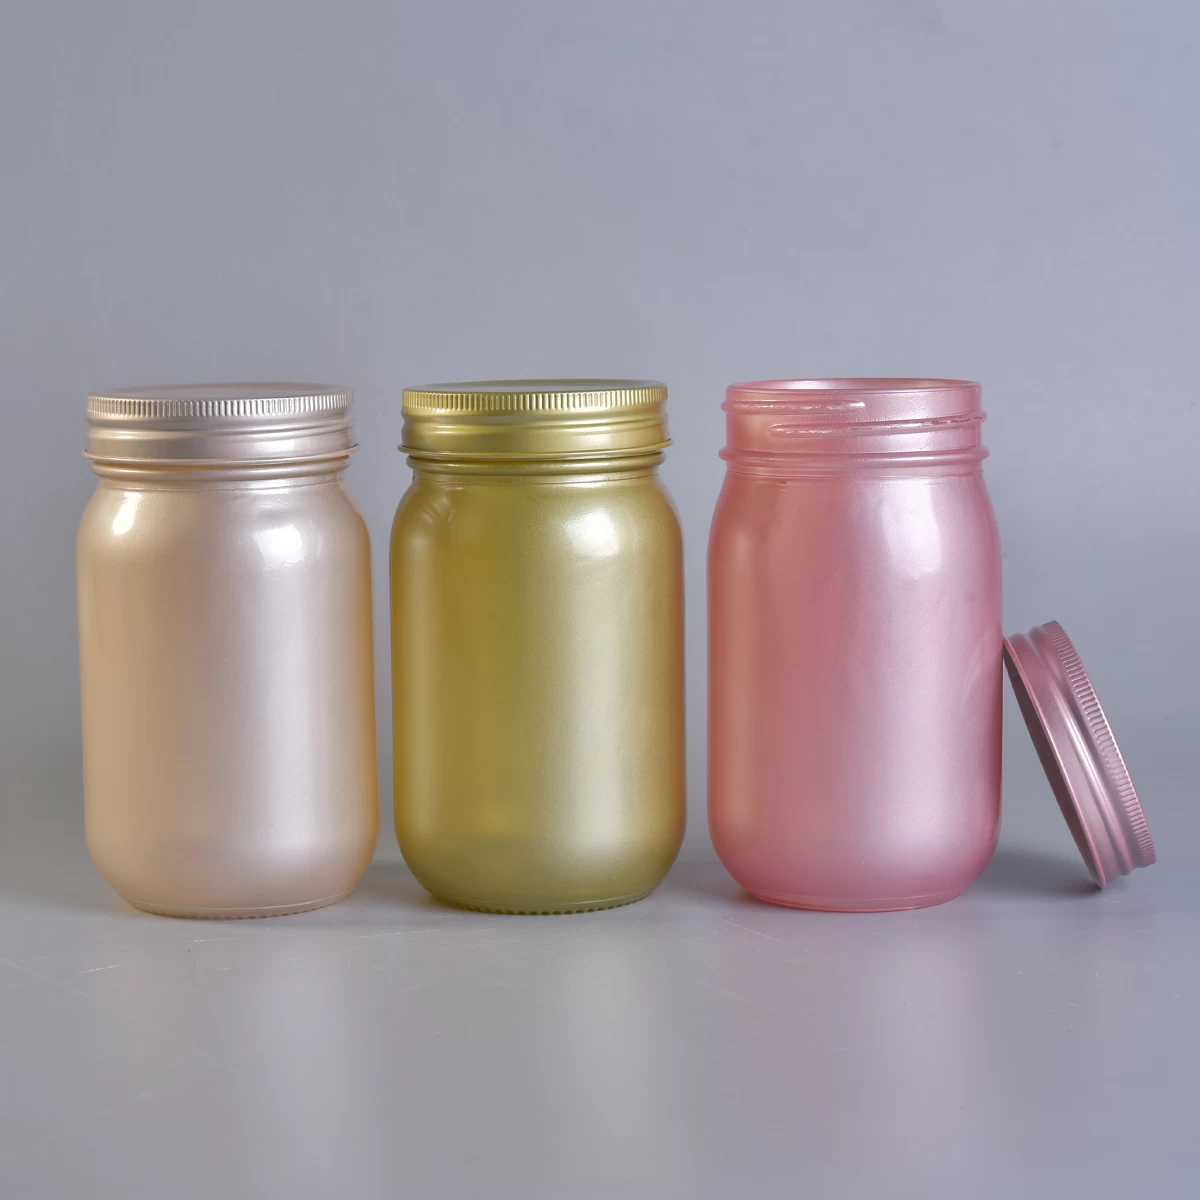 Low MOQ glass mason jar with lids for candle making